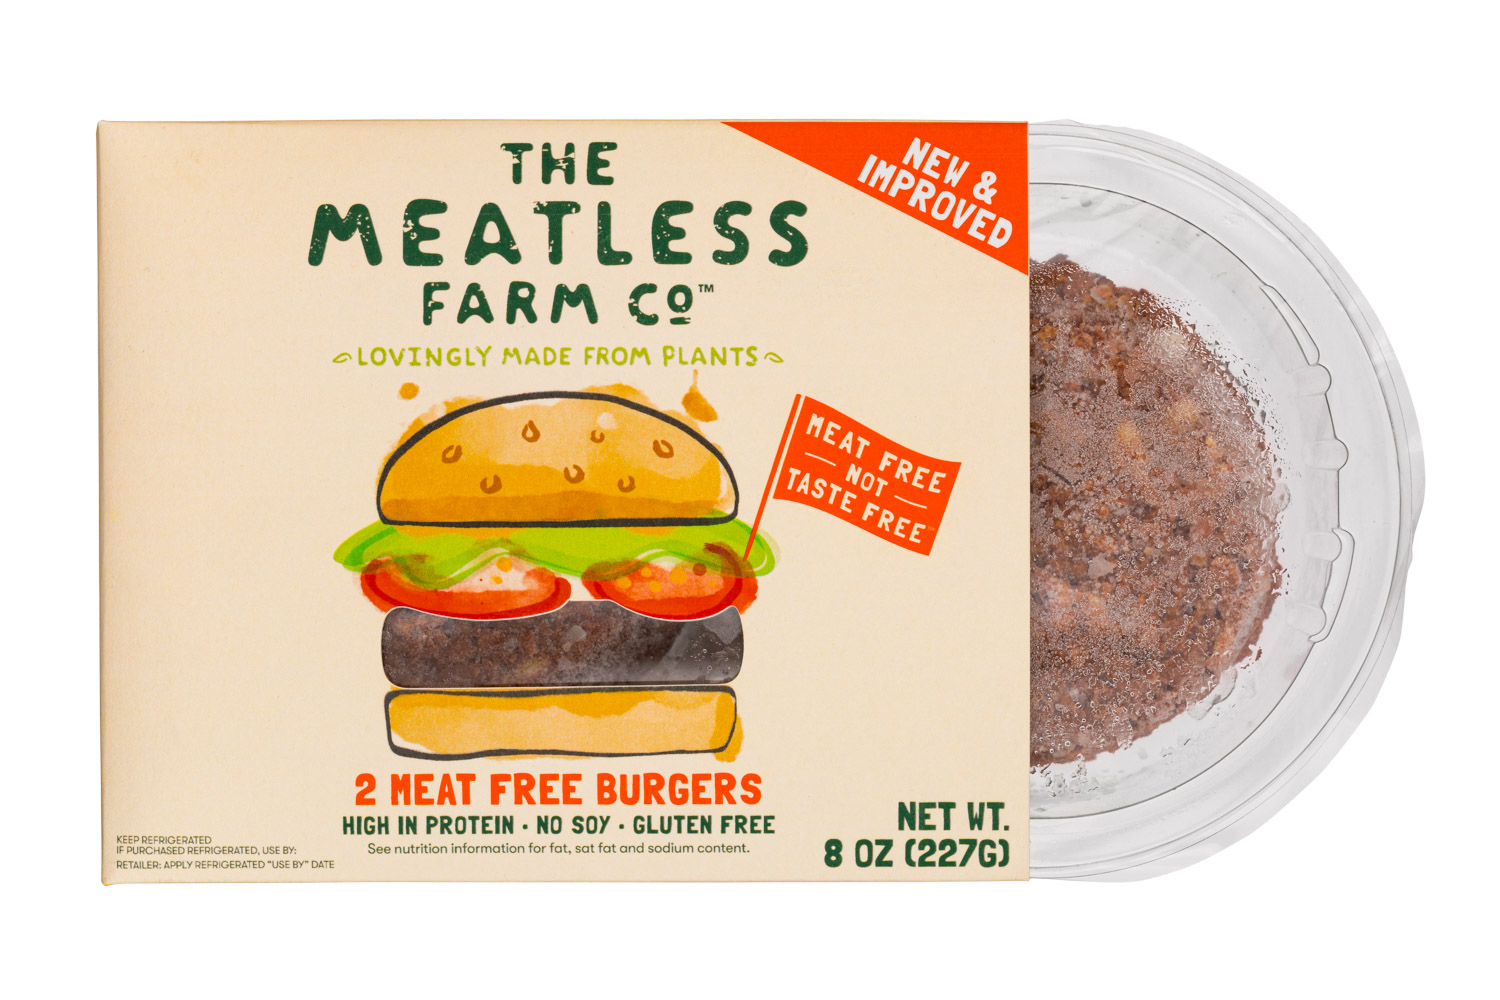 2 Meat Free Burgers